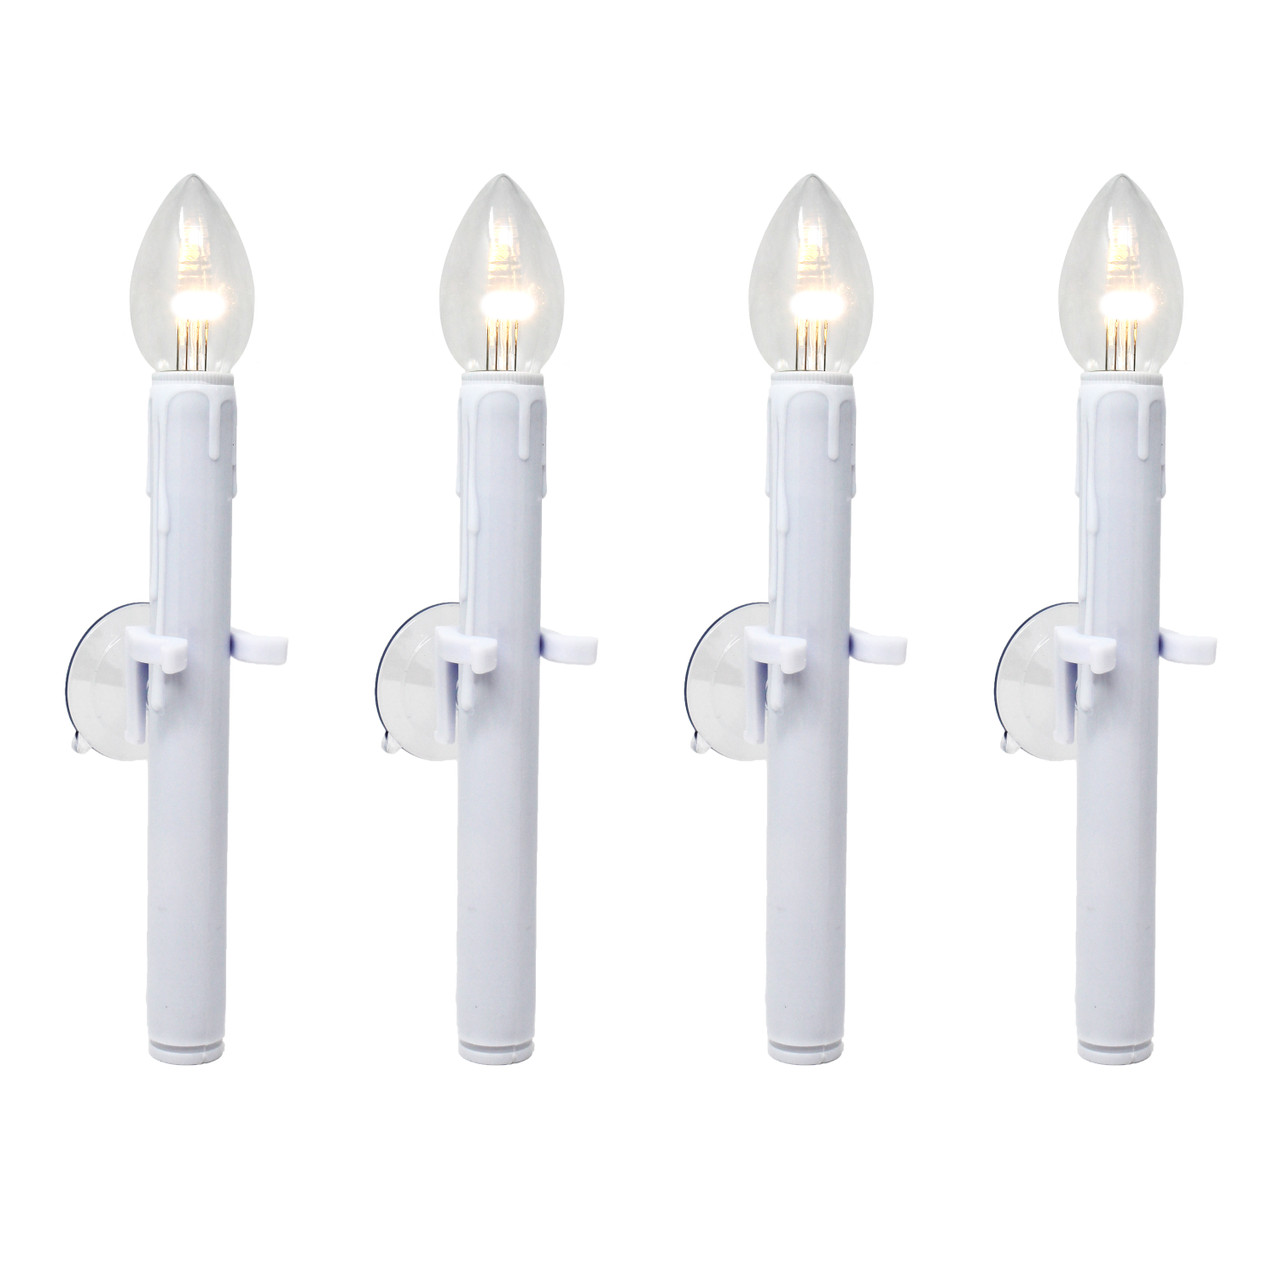 Ultra-Bright LED Window Candles with Timer and Suction Cup, Plastic Shatterproof Bulbs, Battery Operated, White Candlestick (VT-9134-R4-W, Pack of 4)